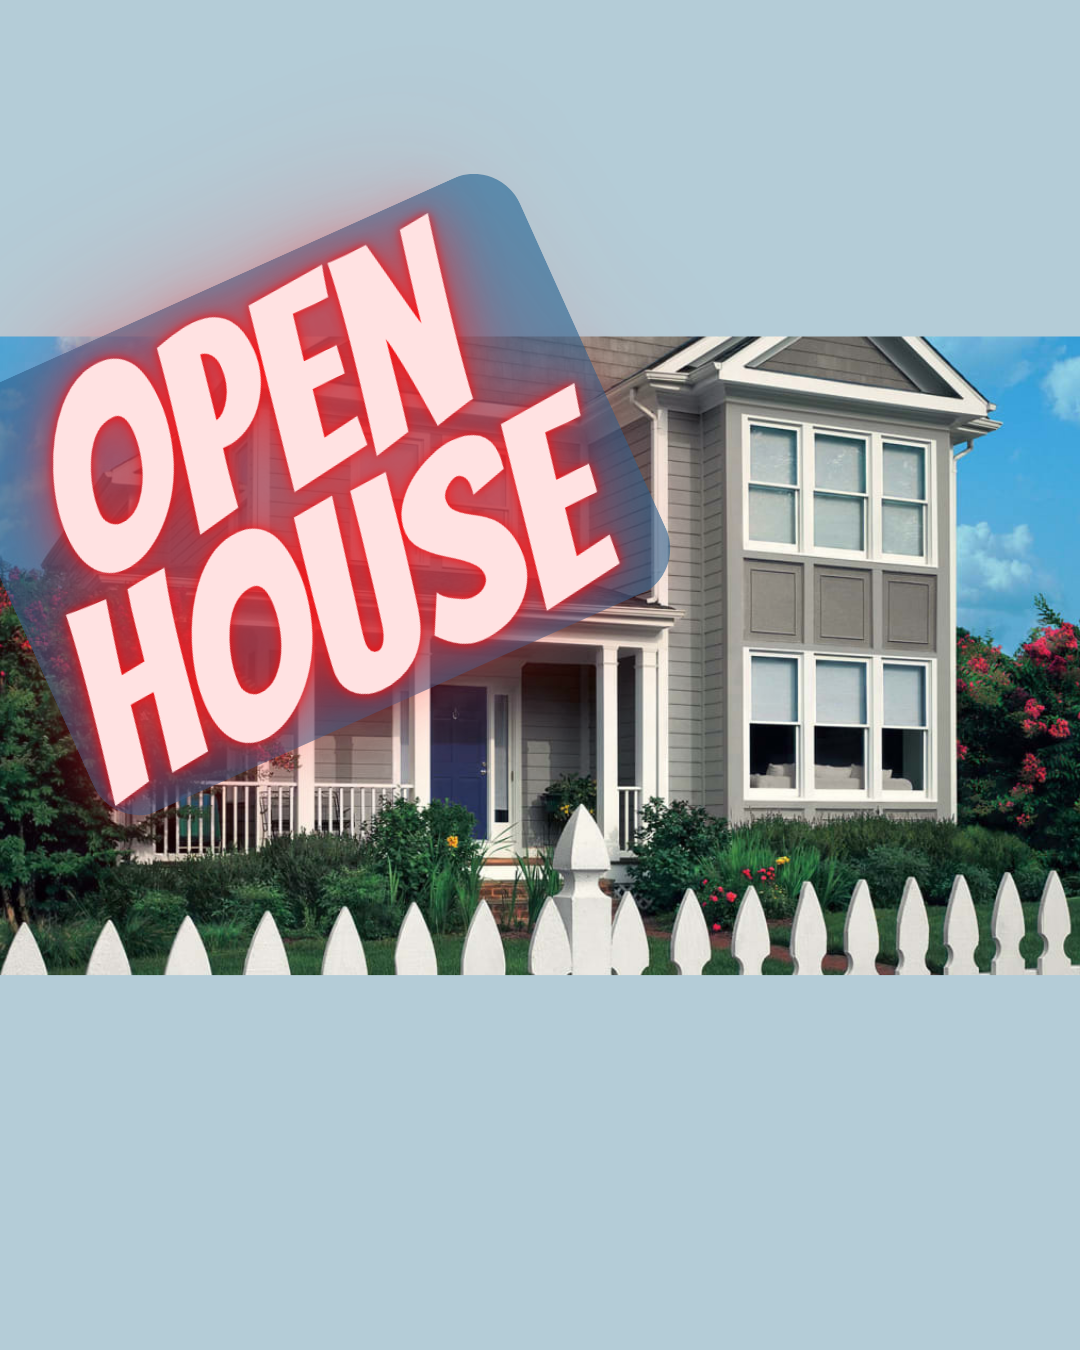 Check my Open House video